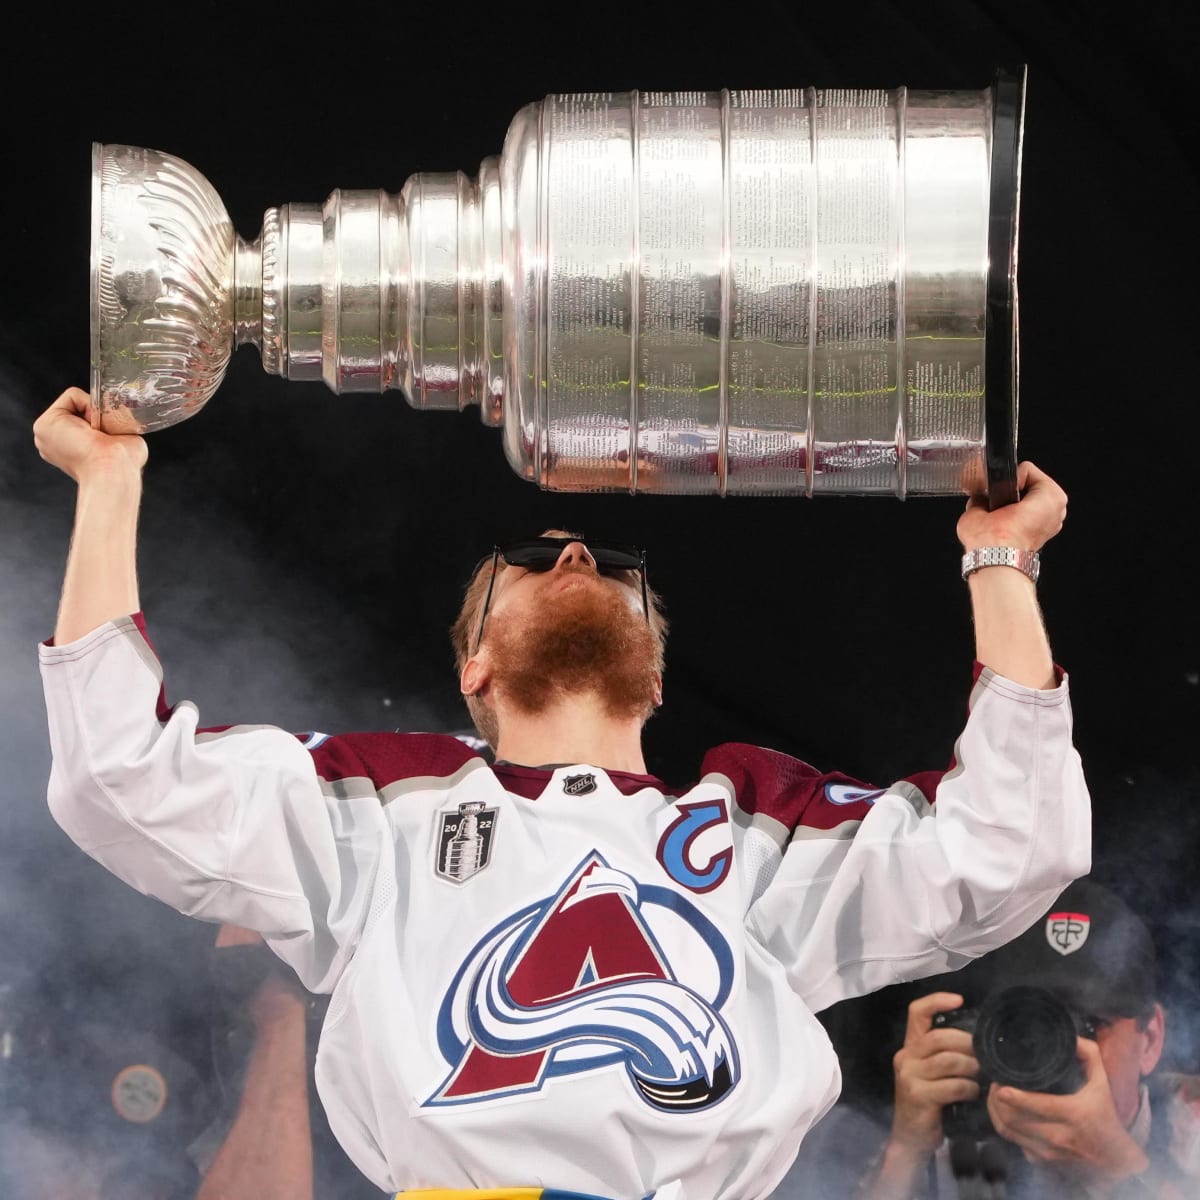 The Colorado Avalanche are favorites to reclaim the Stanley Cup